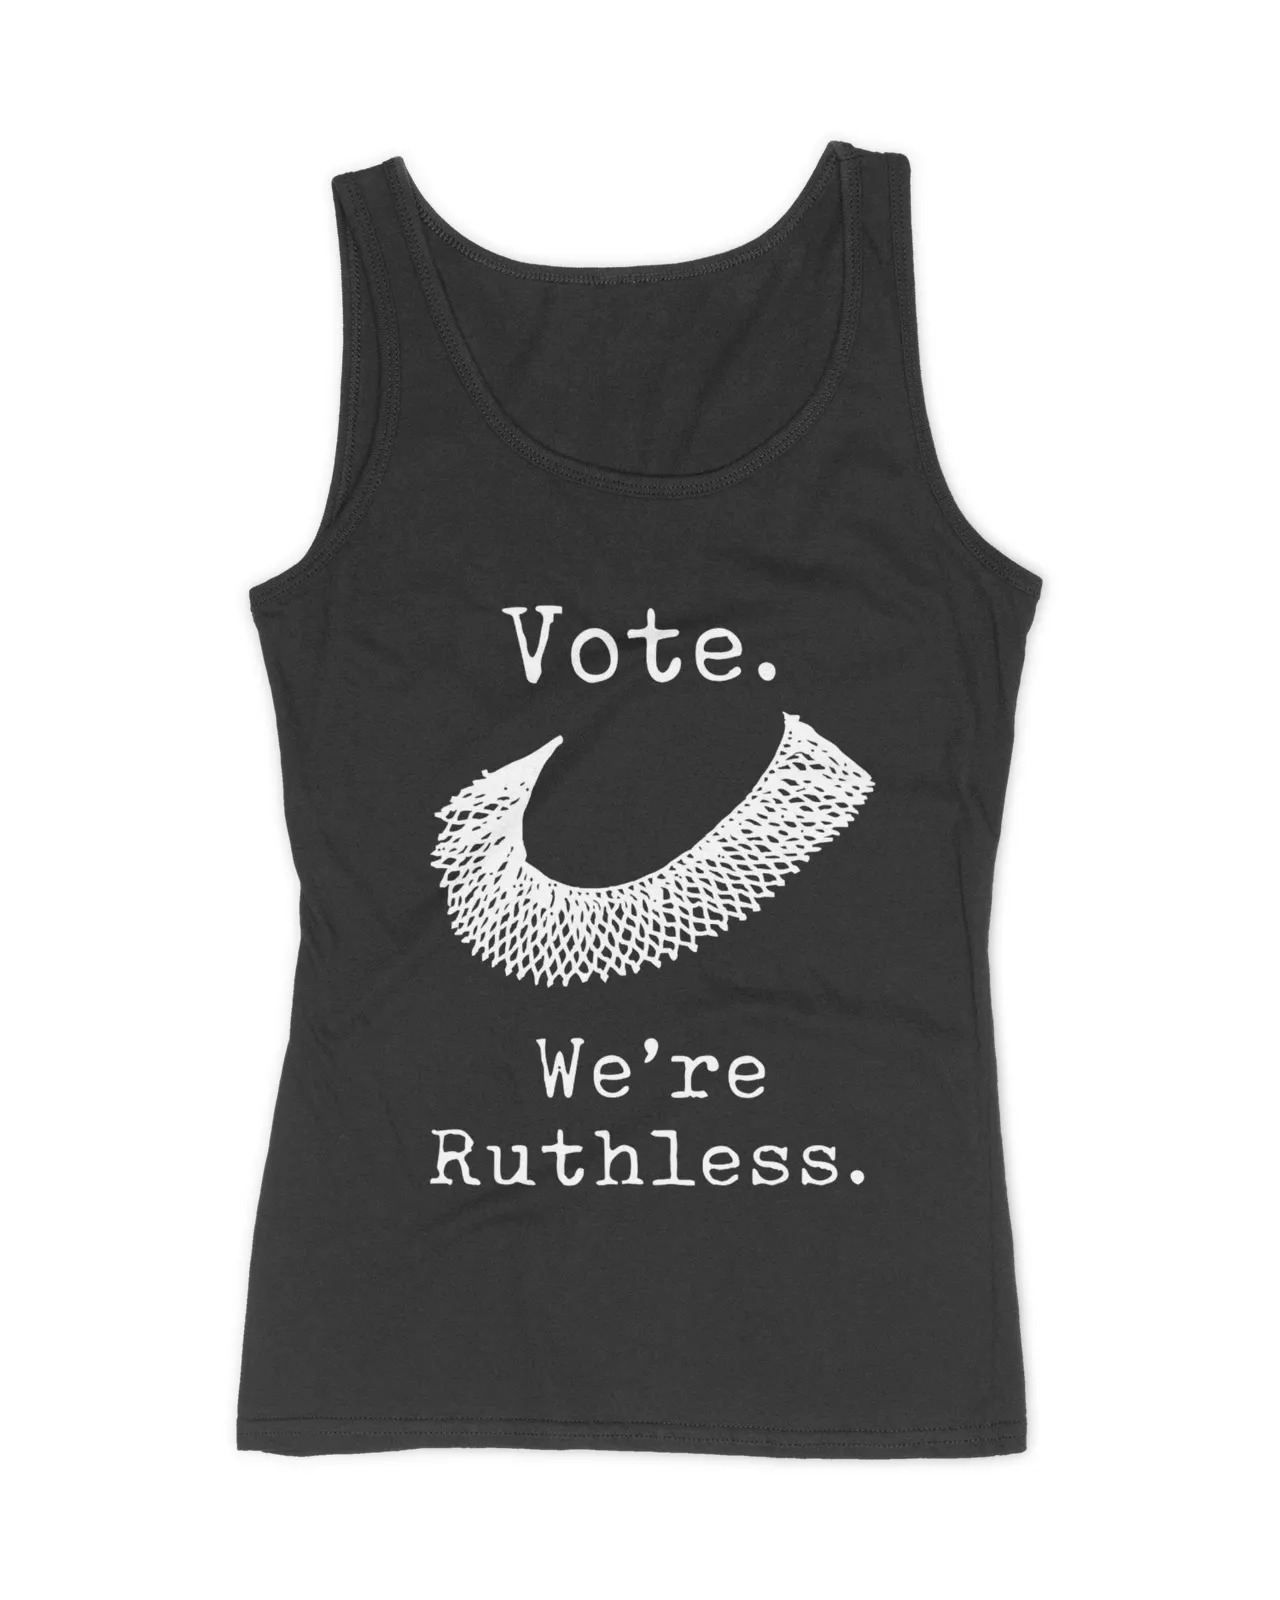 Women's Rights - Vote - We're Ruthless - Rbg T-shirt